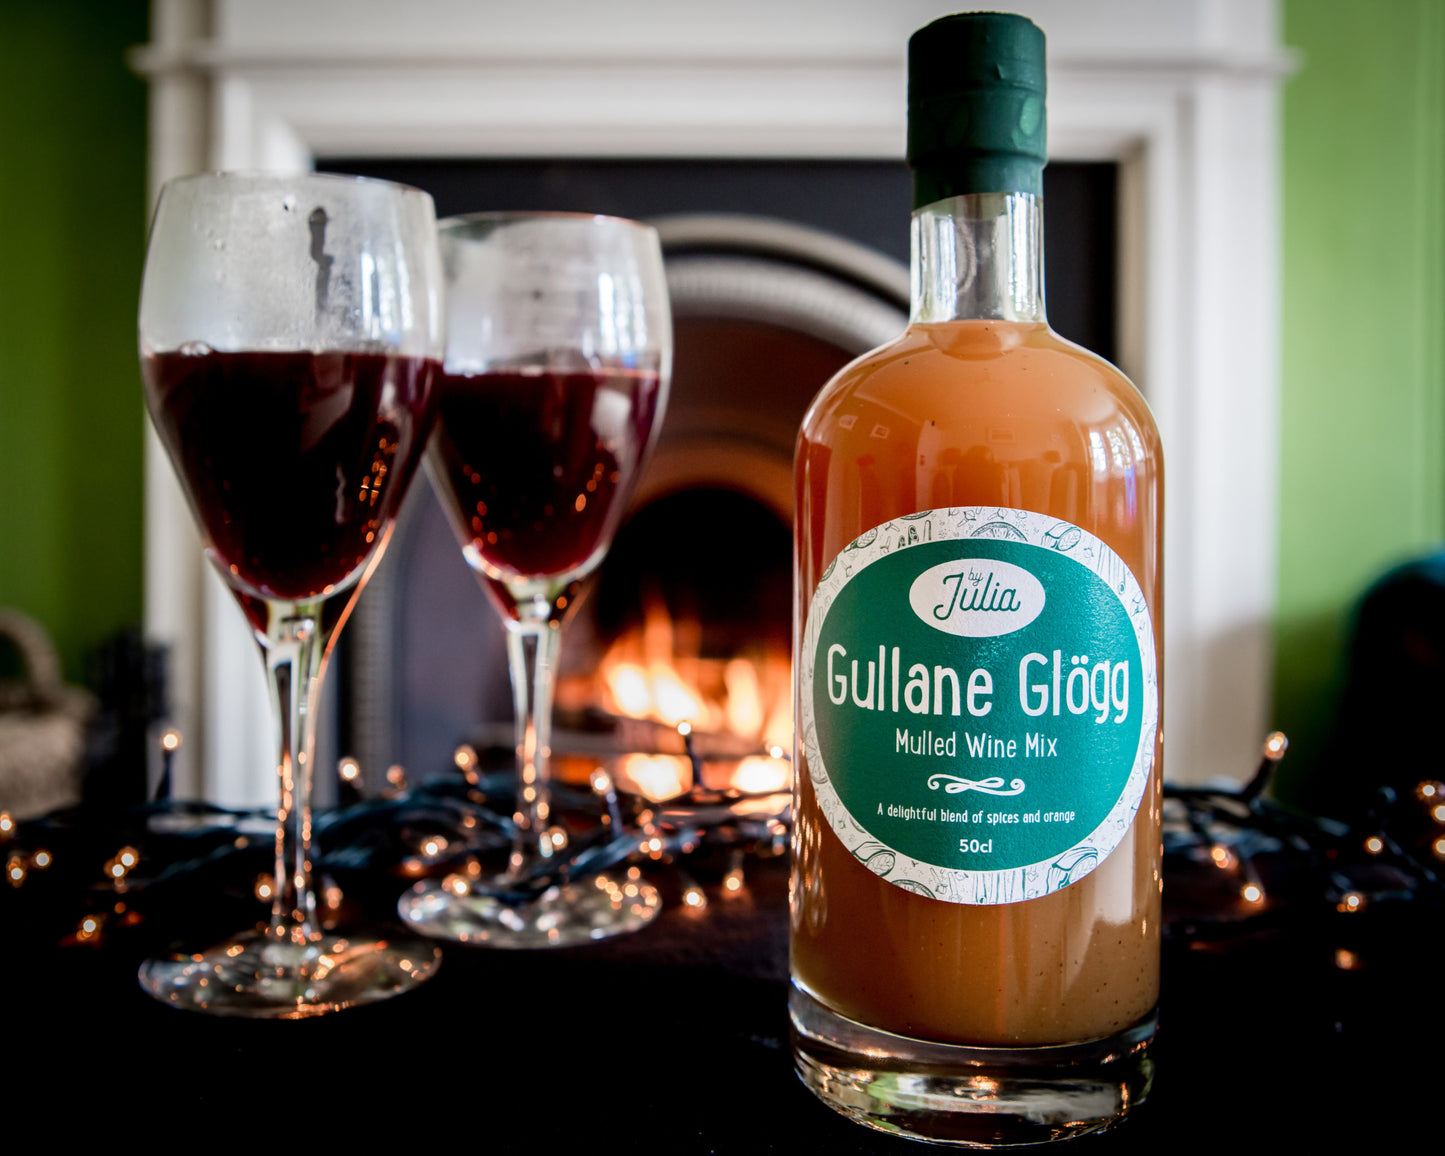 Gullane Glögg Mulled Wine Mix and two glasses of mulled wine in front of fire